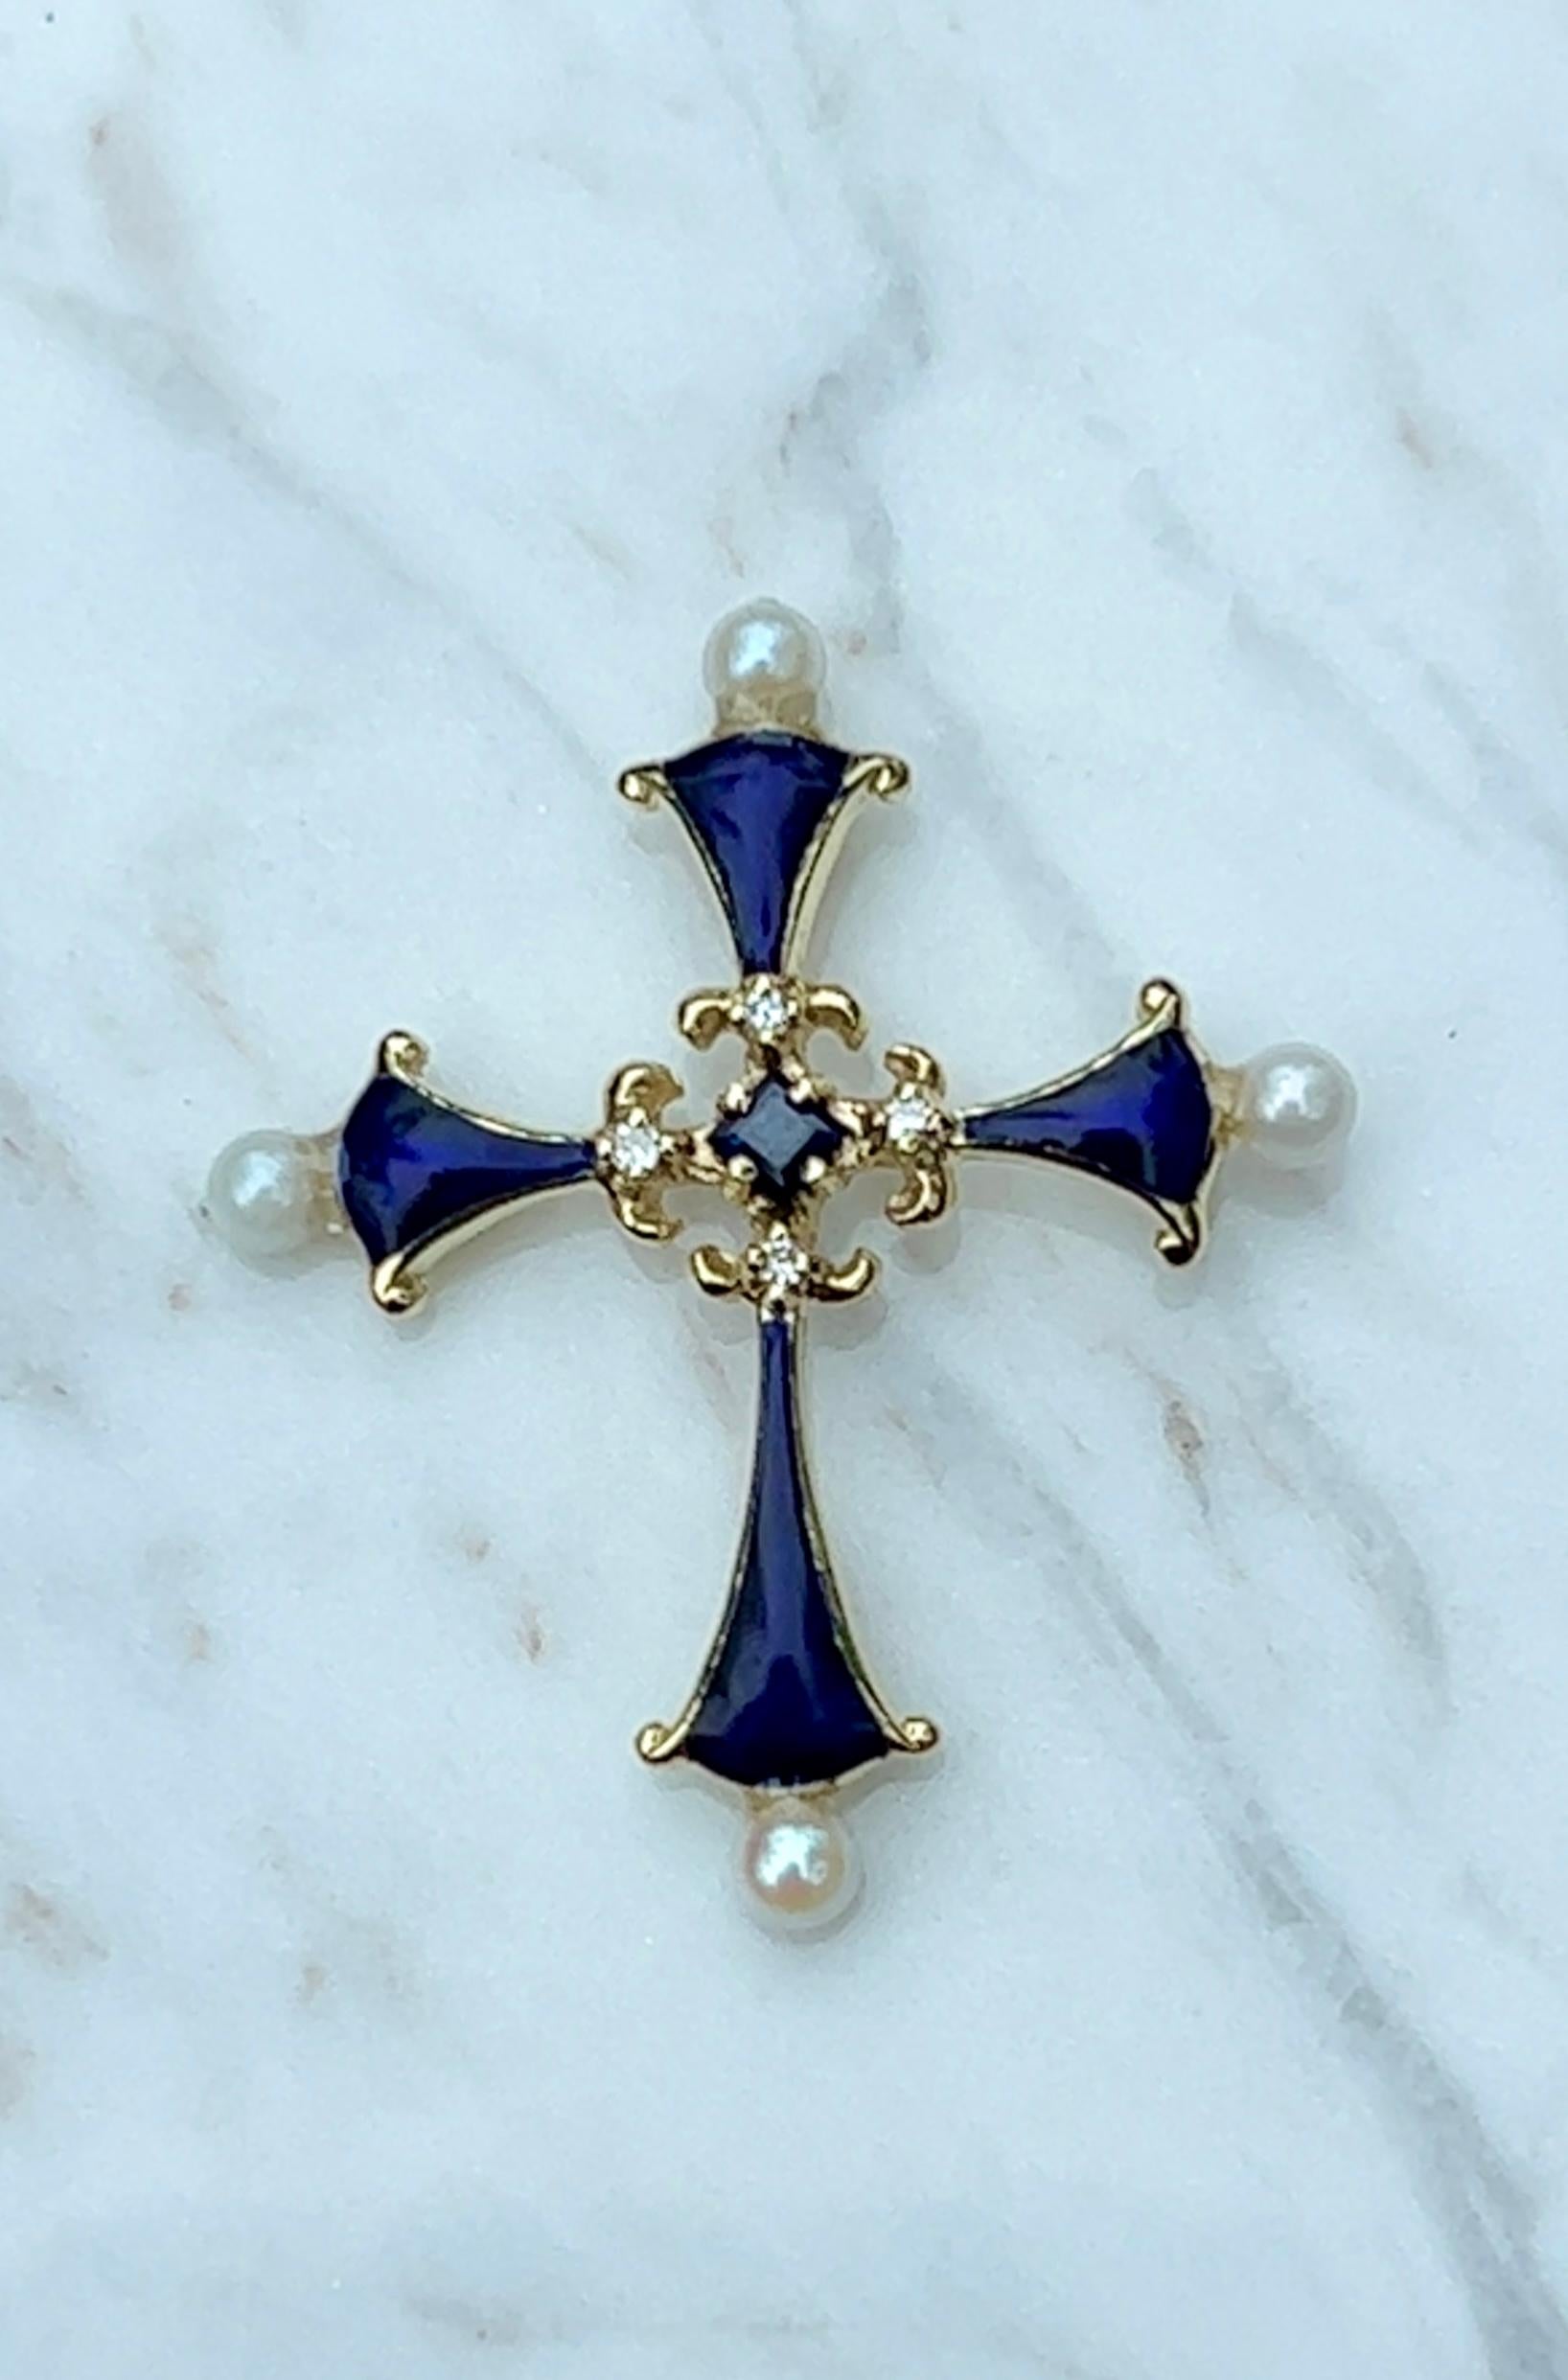 One 14k Yellow Gold Enamel Faberge Franklin Mint Sapphire Midnight Cross Pendant. This vintage 14k yellow gold enamel sapphire midnight cross pendant, an original design by the house of Igor Carl Faberge made for Franklin Mint in 1983. Featuring a